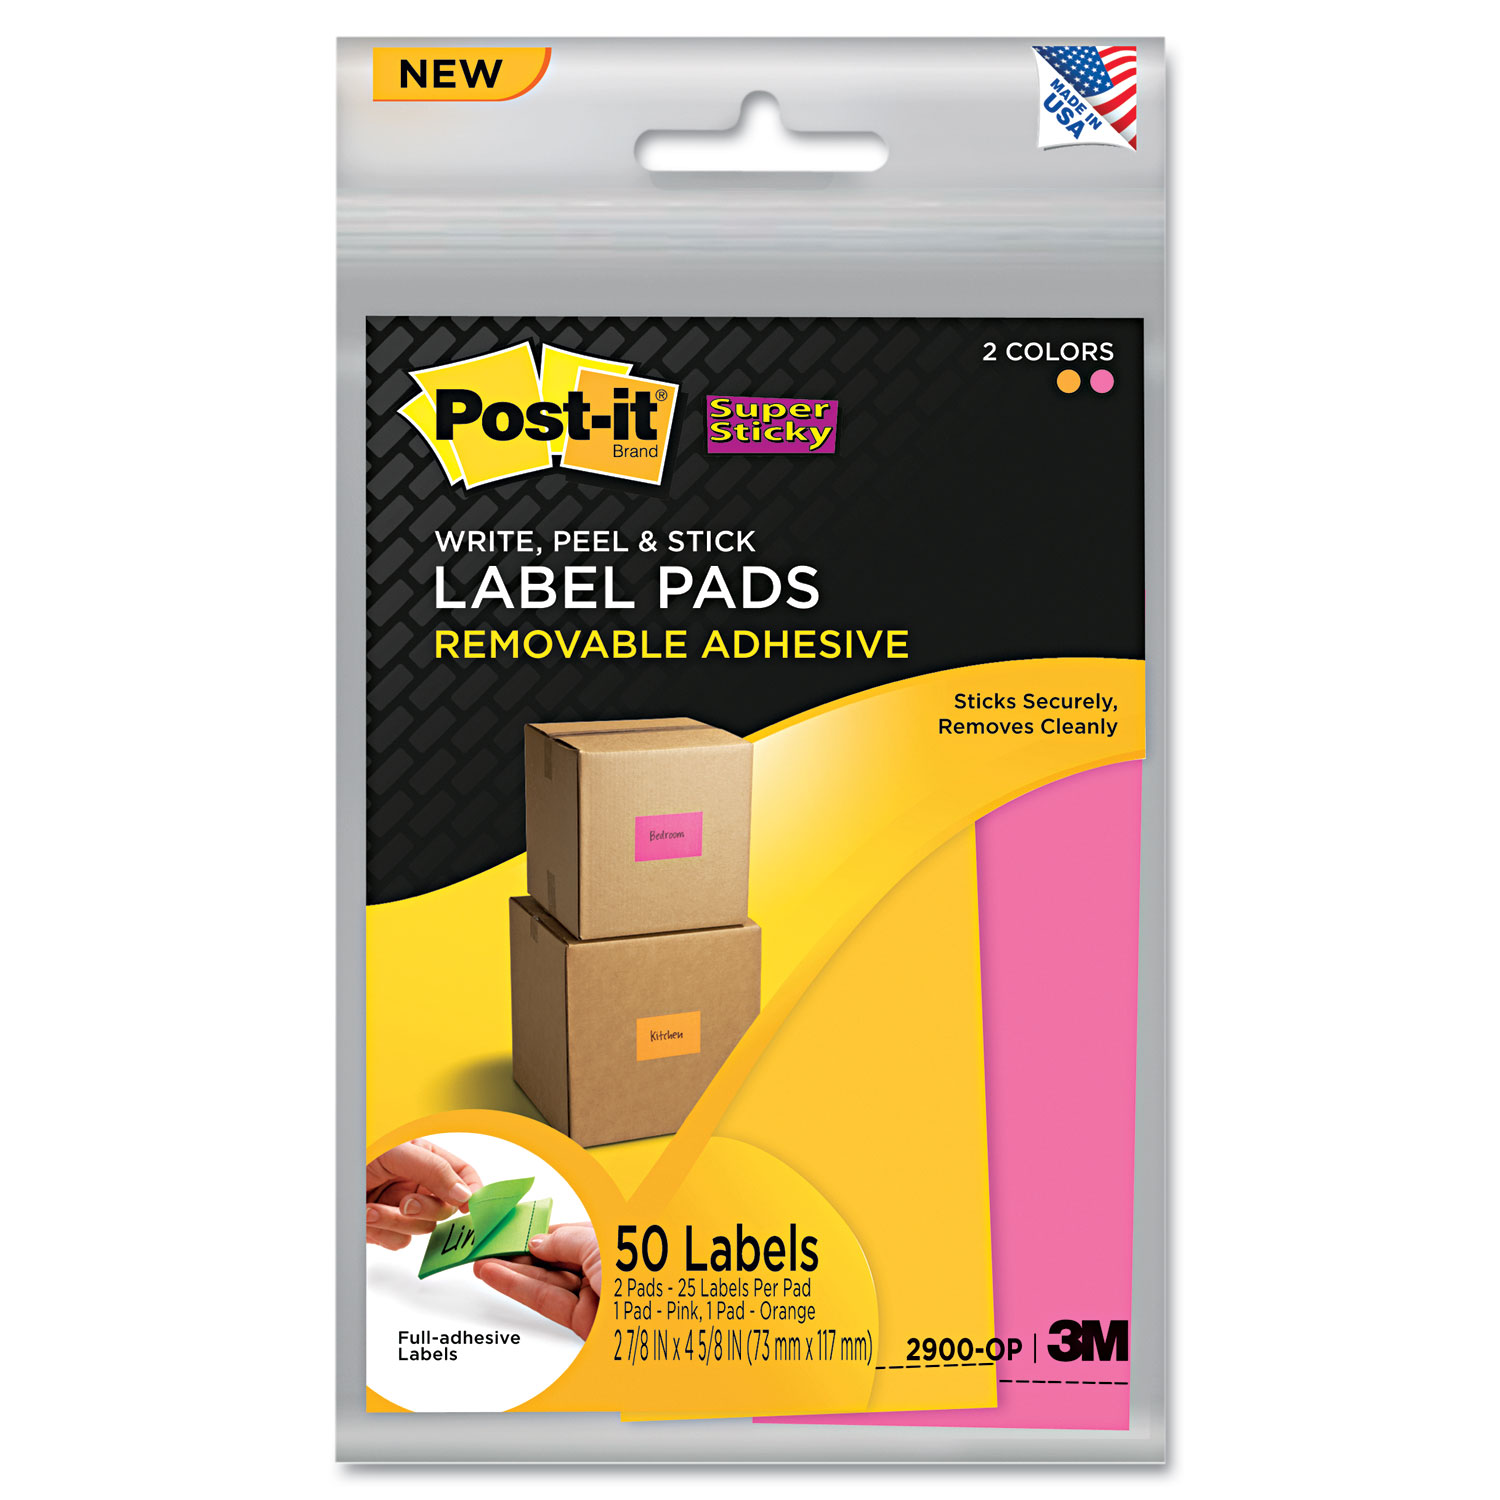 REMOVABLE LABEL PADS by Post-it® Super Sticky MMM2900OP